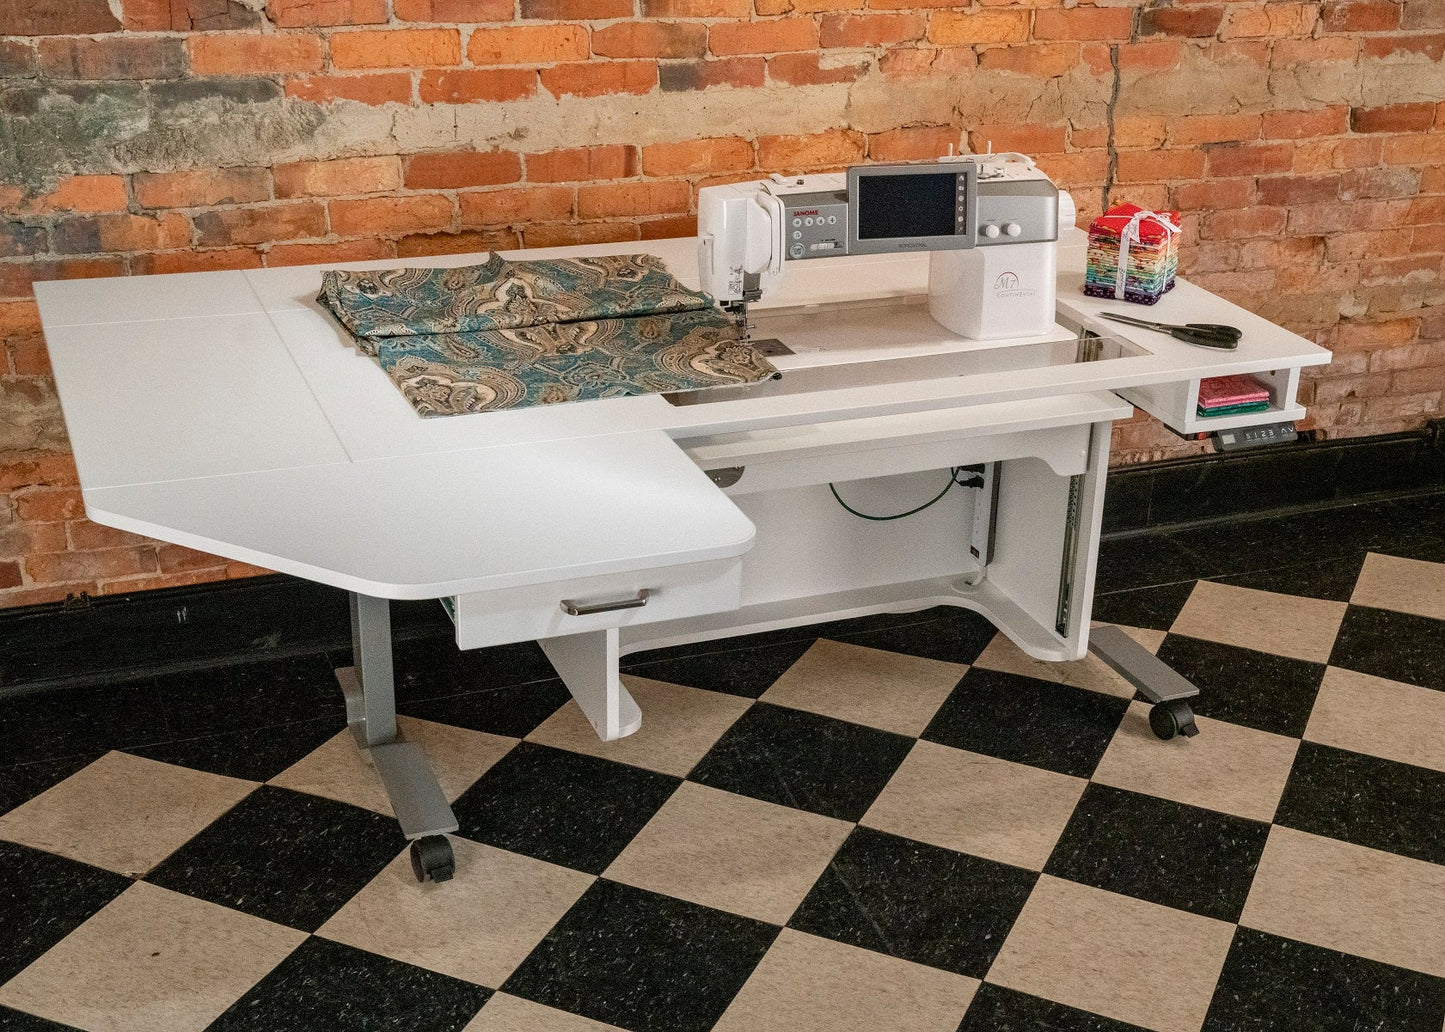 HORN 9100 Sewing Craft Table